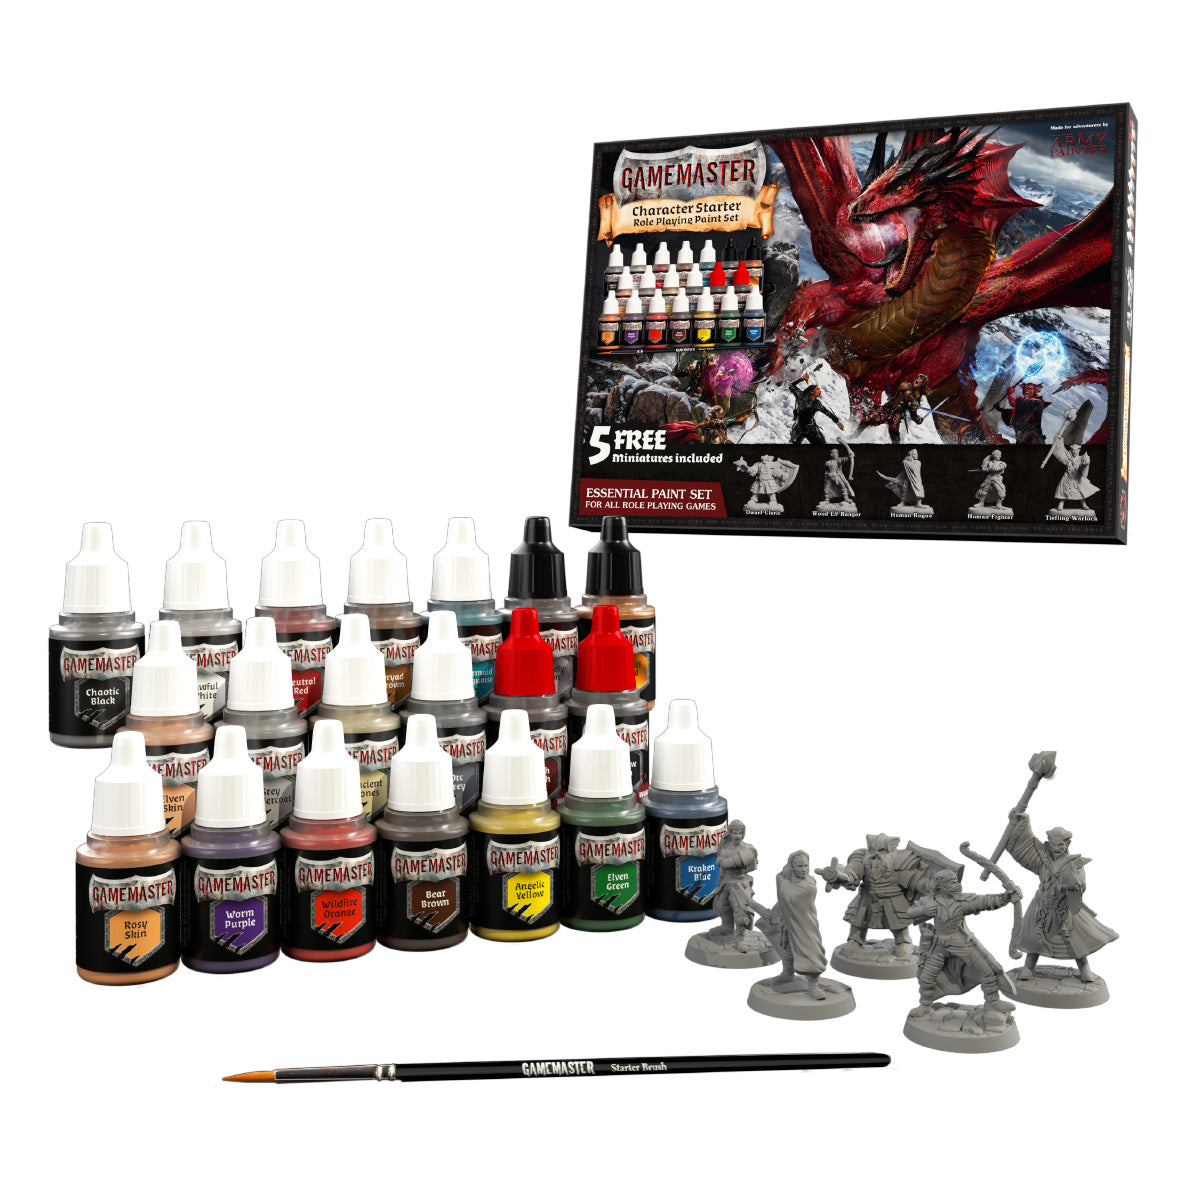 Character Starter - Role Playing Paint Set (GameMaster)